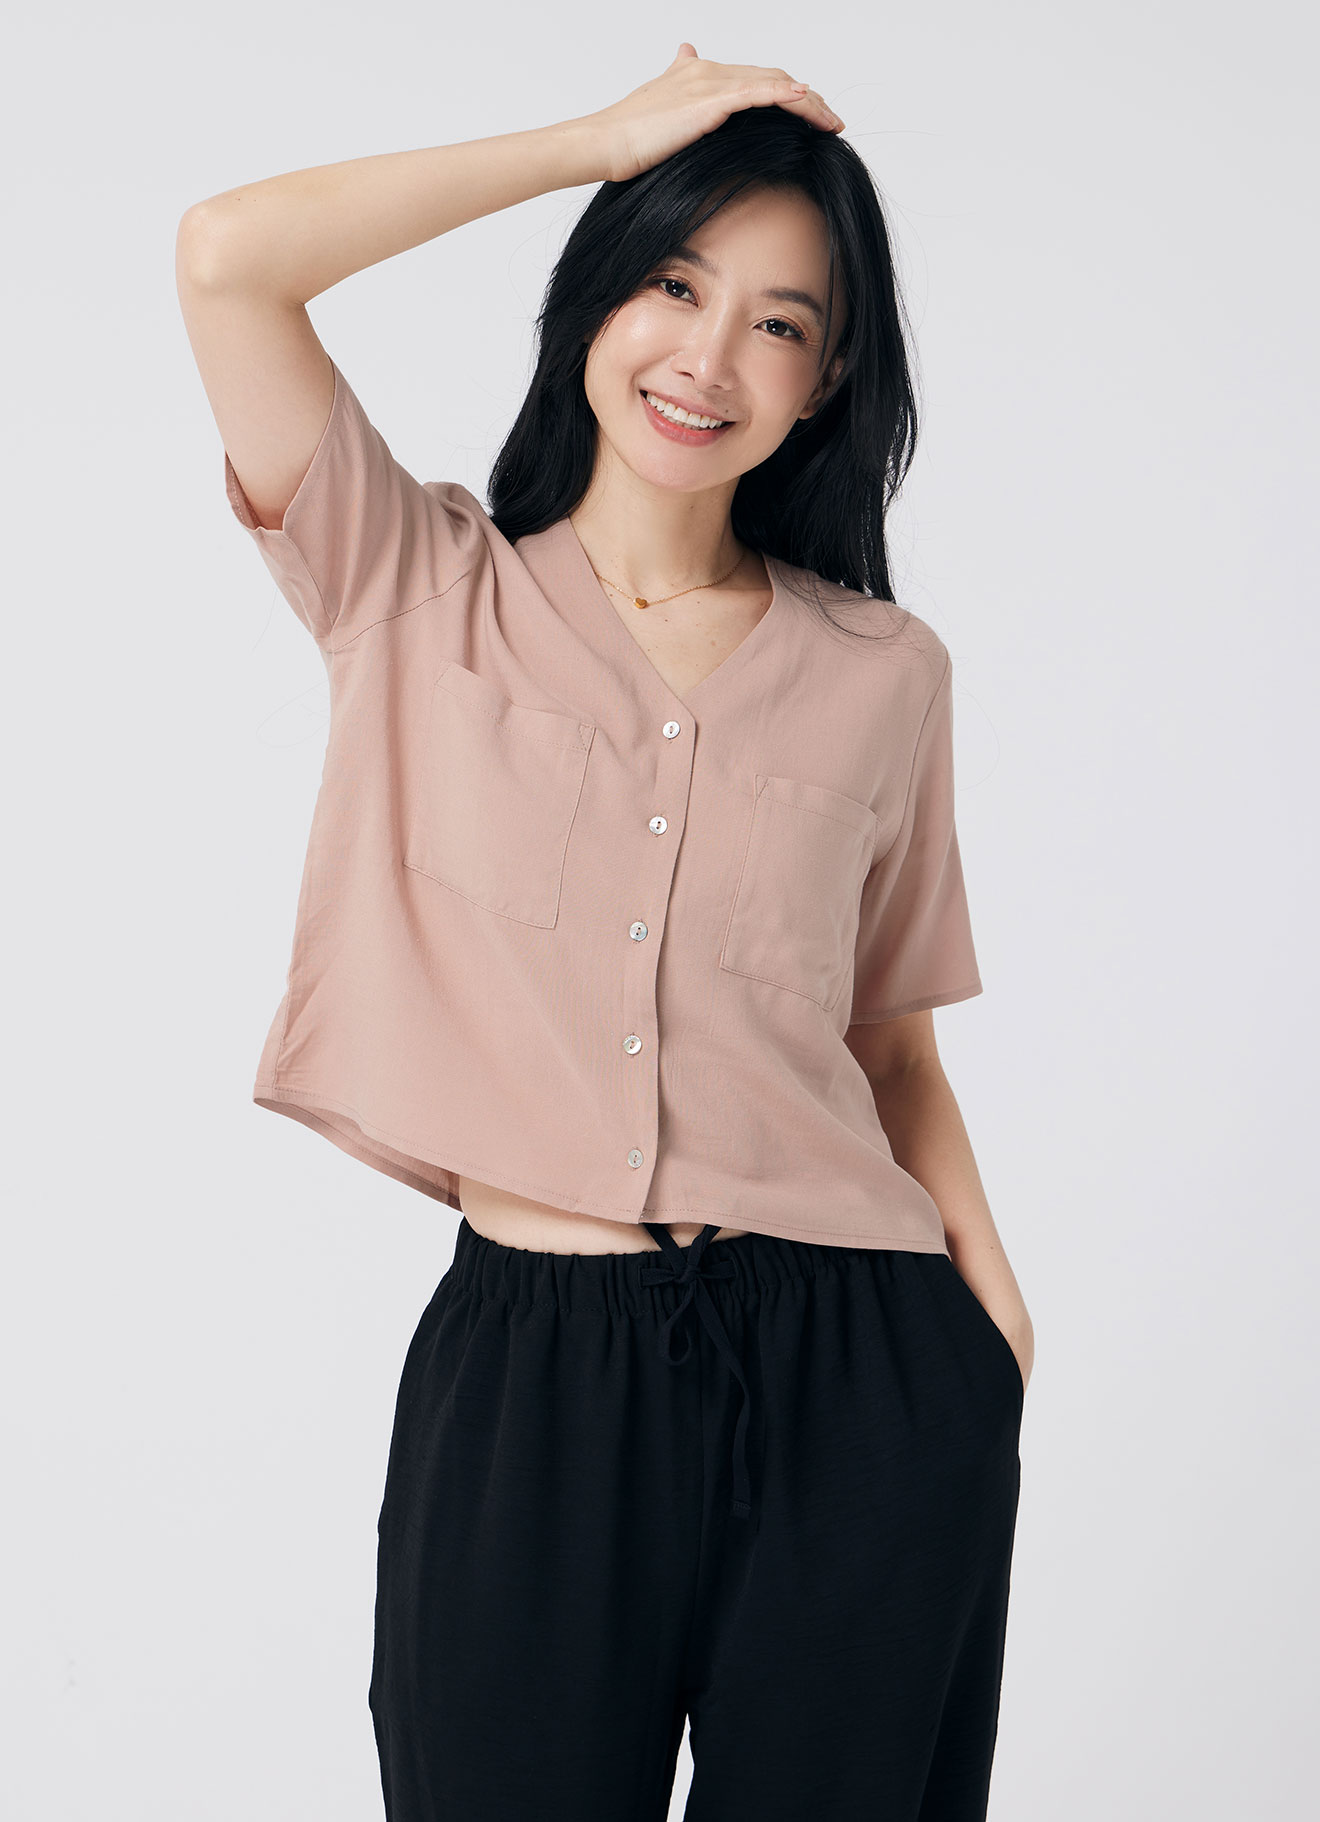 Maple-Sugar by V-Neck Blouse